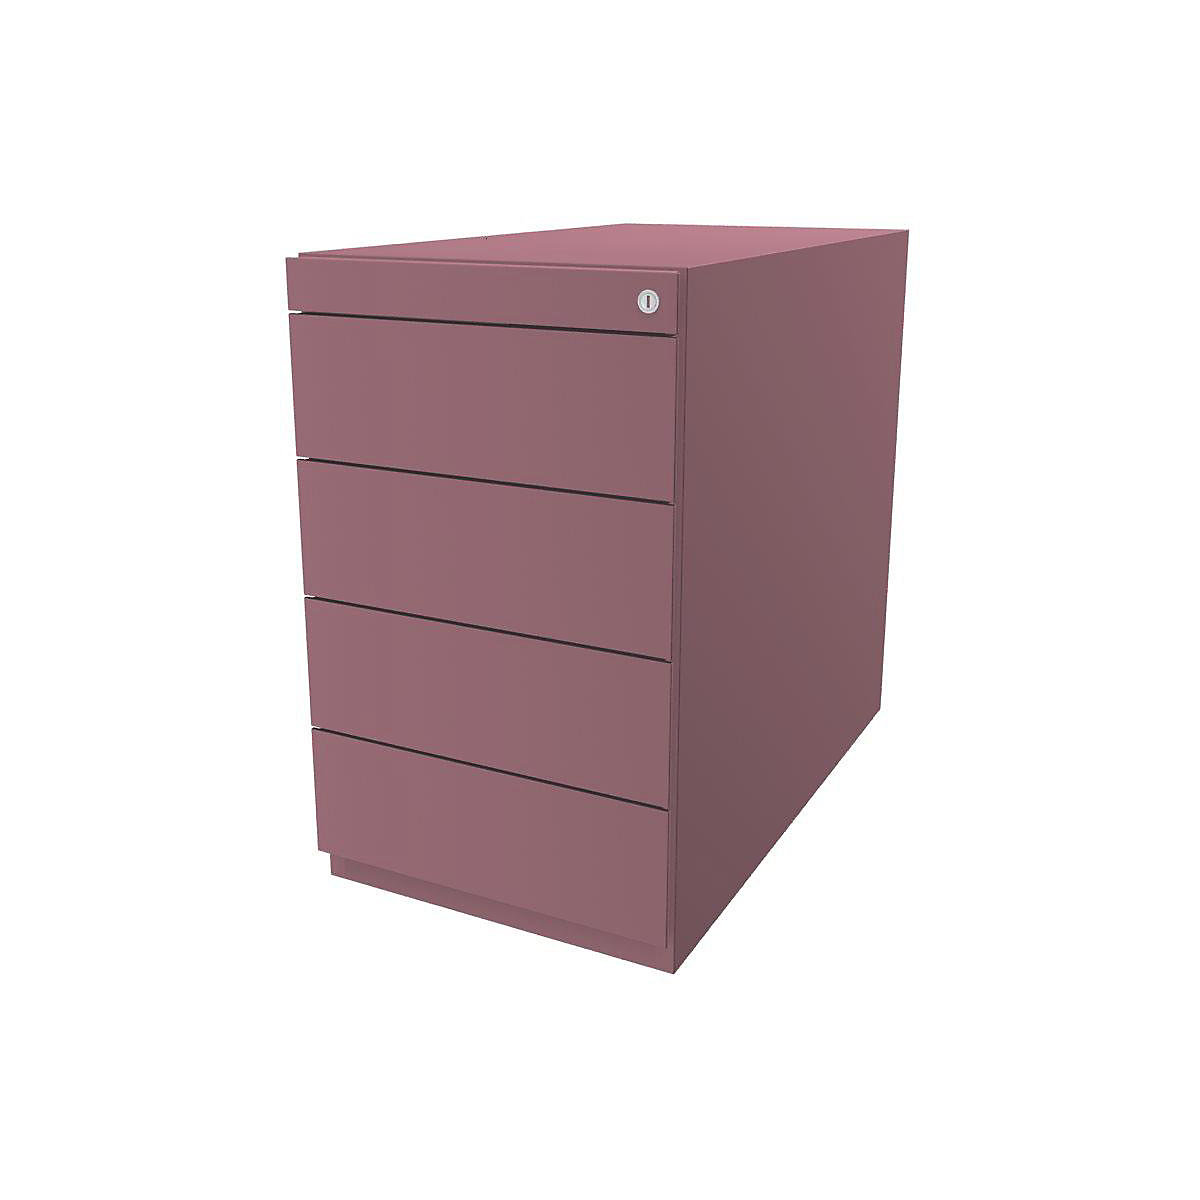 Note™ fixed pedestal, with 4 universal drawers - BISLEY